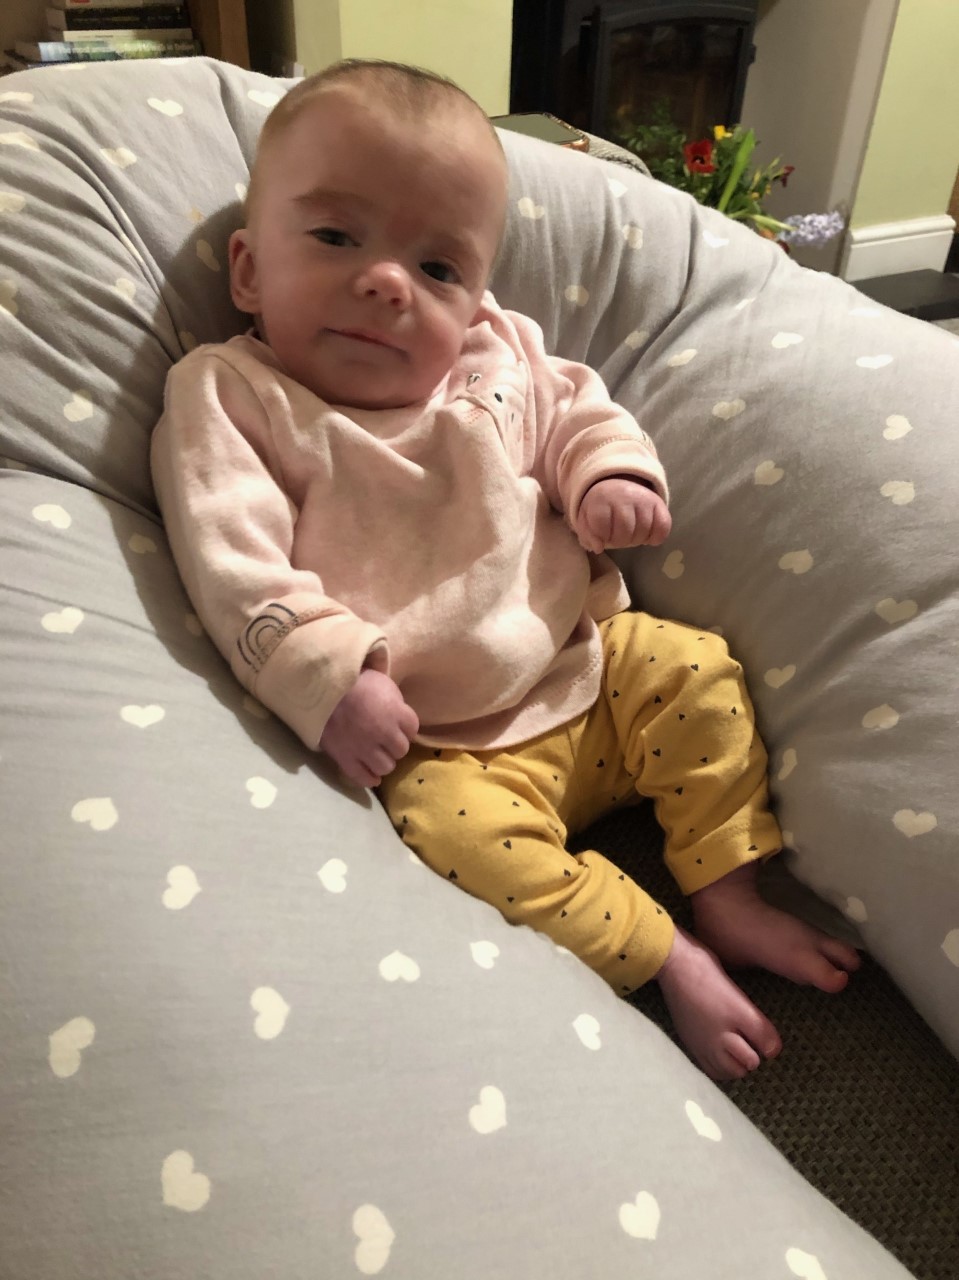 A baby girl sitting propped up against a spotty ringed nursing cushion